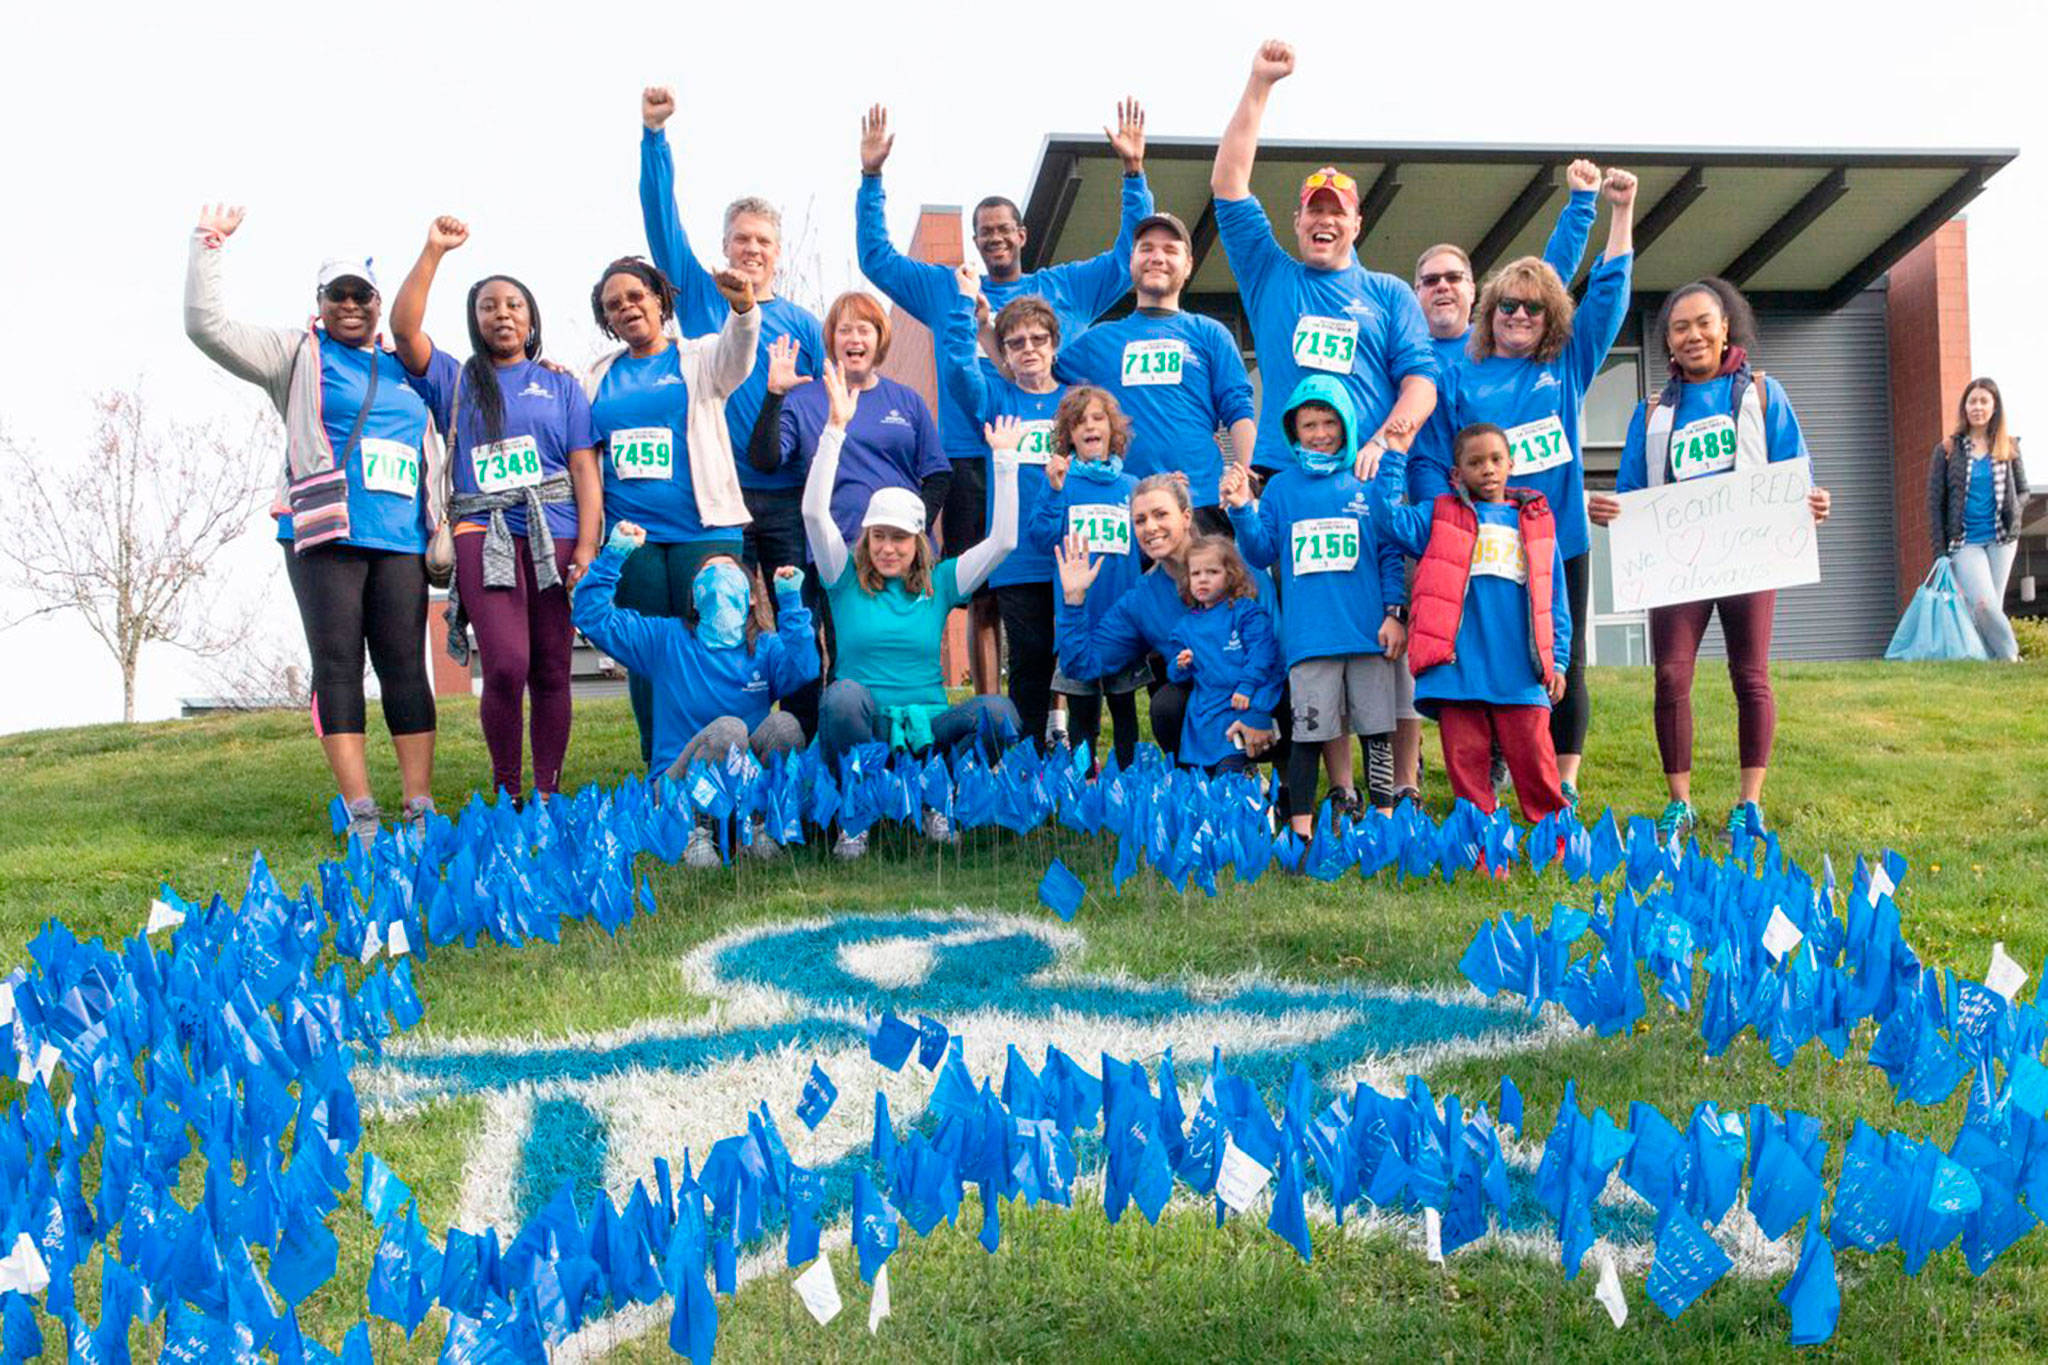 A local team supports the cause of colon cancer prevention at the Mercer Island Rotary Half Marathon on March 24. Photo courtesy of Gillian Peckham